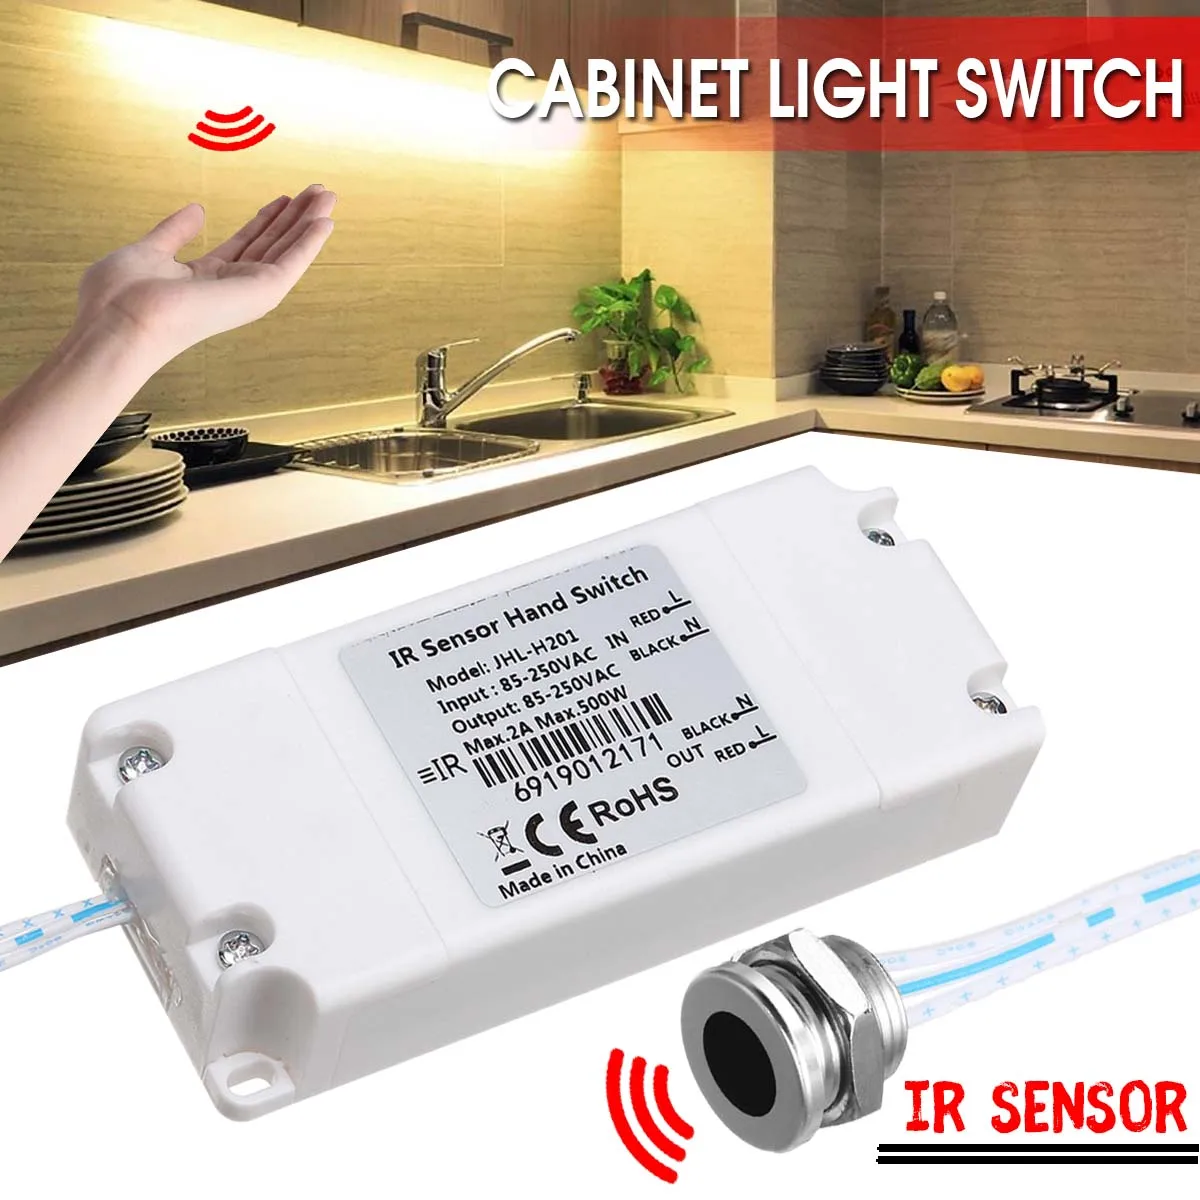 

1Pc IR Motion Hand Wave Sensor Hand Switch Cabinet Light Switch Hand Sweep Switch 2m 1m 30cm Sense for Home Cupboard Kitchen